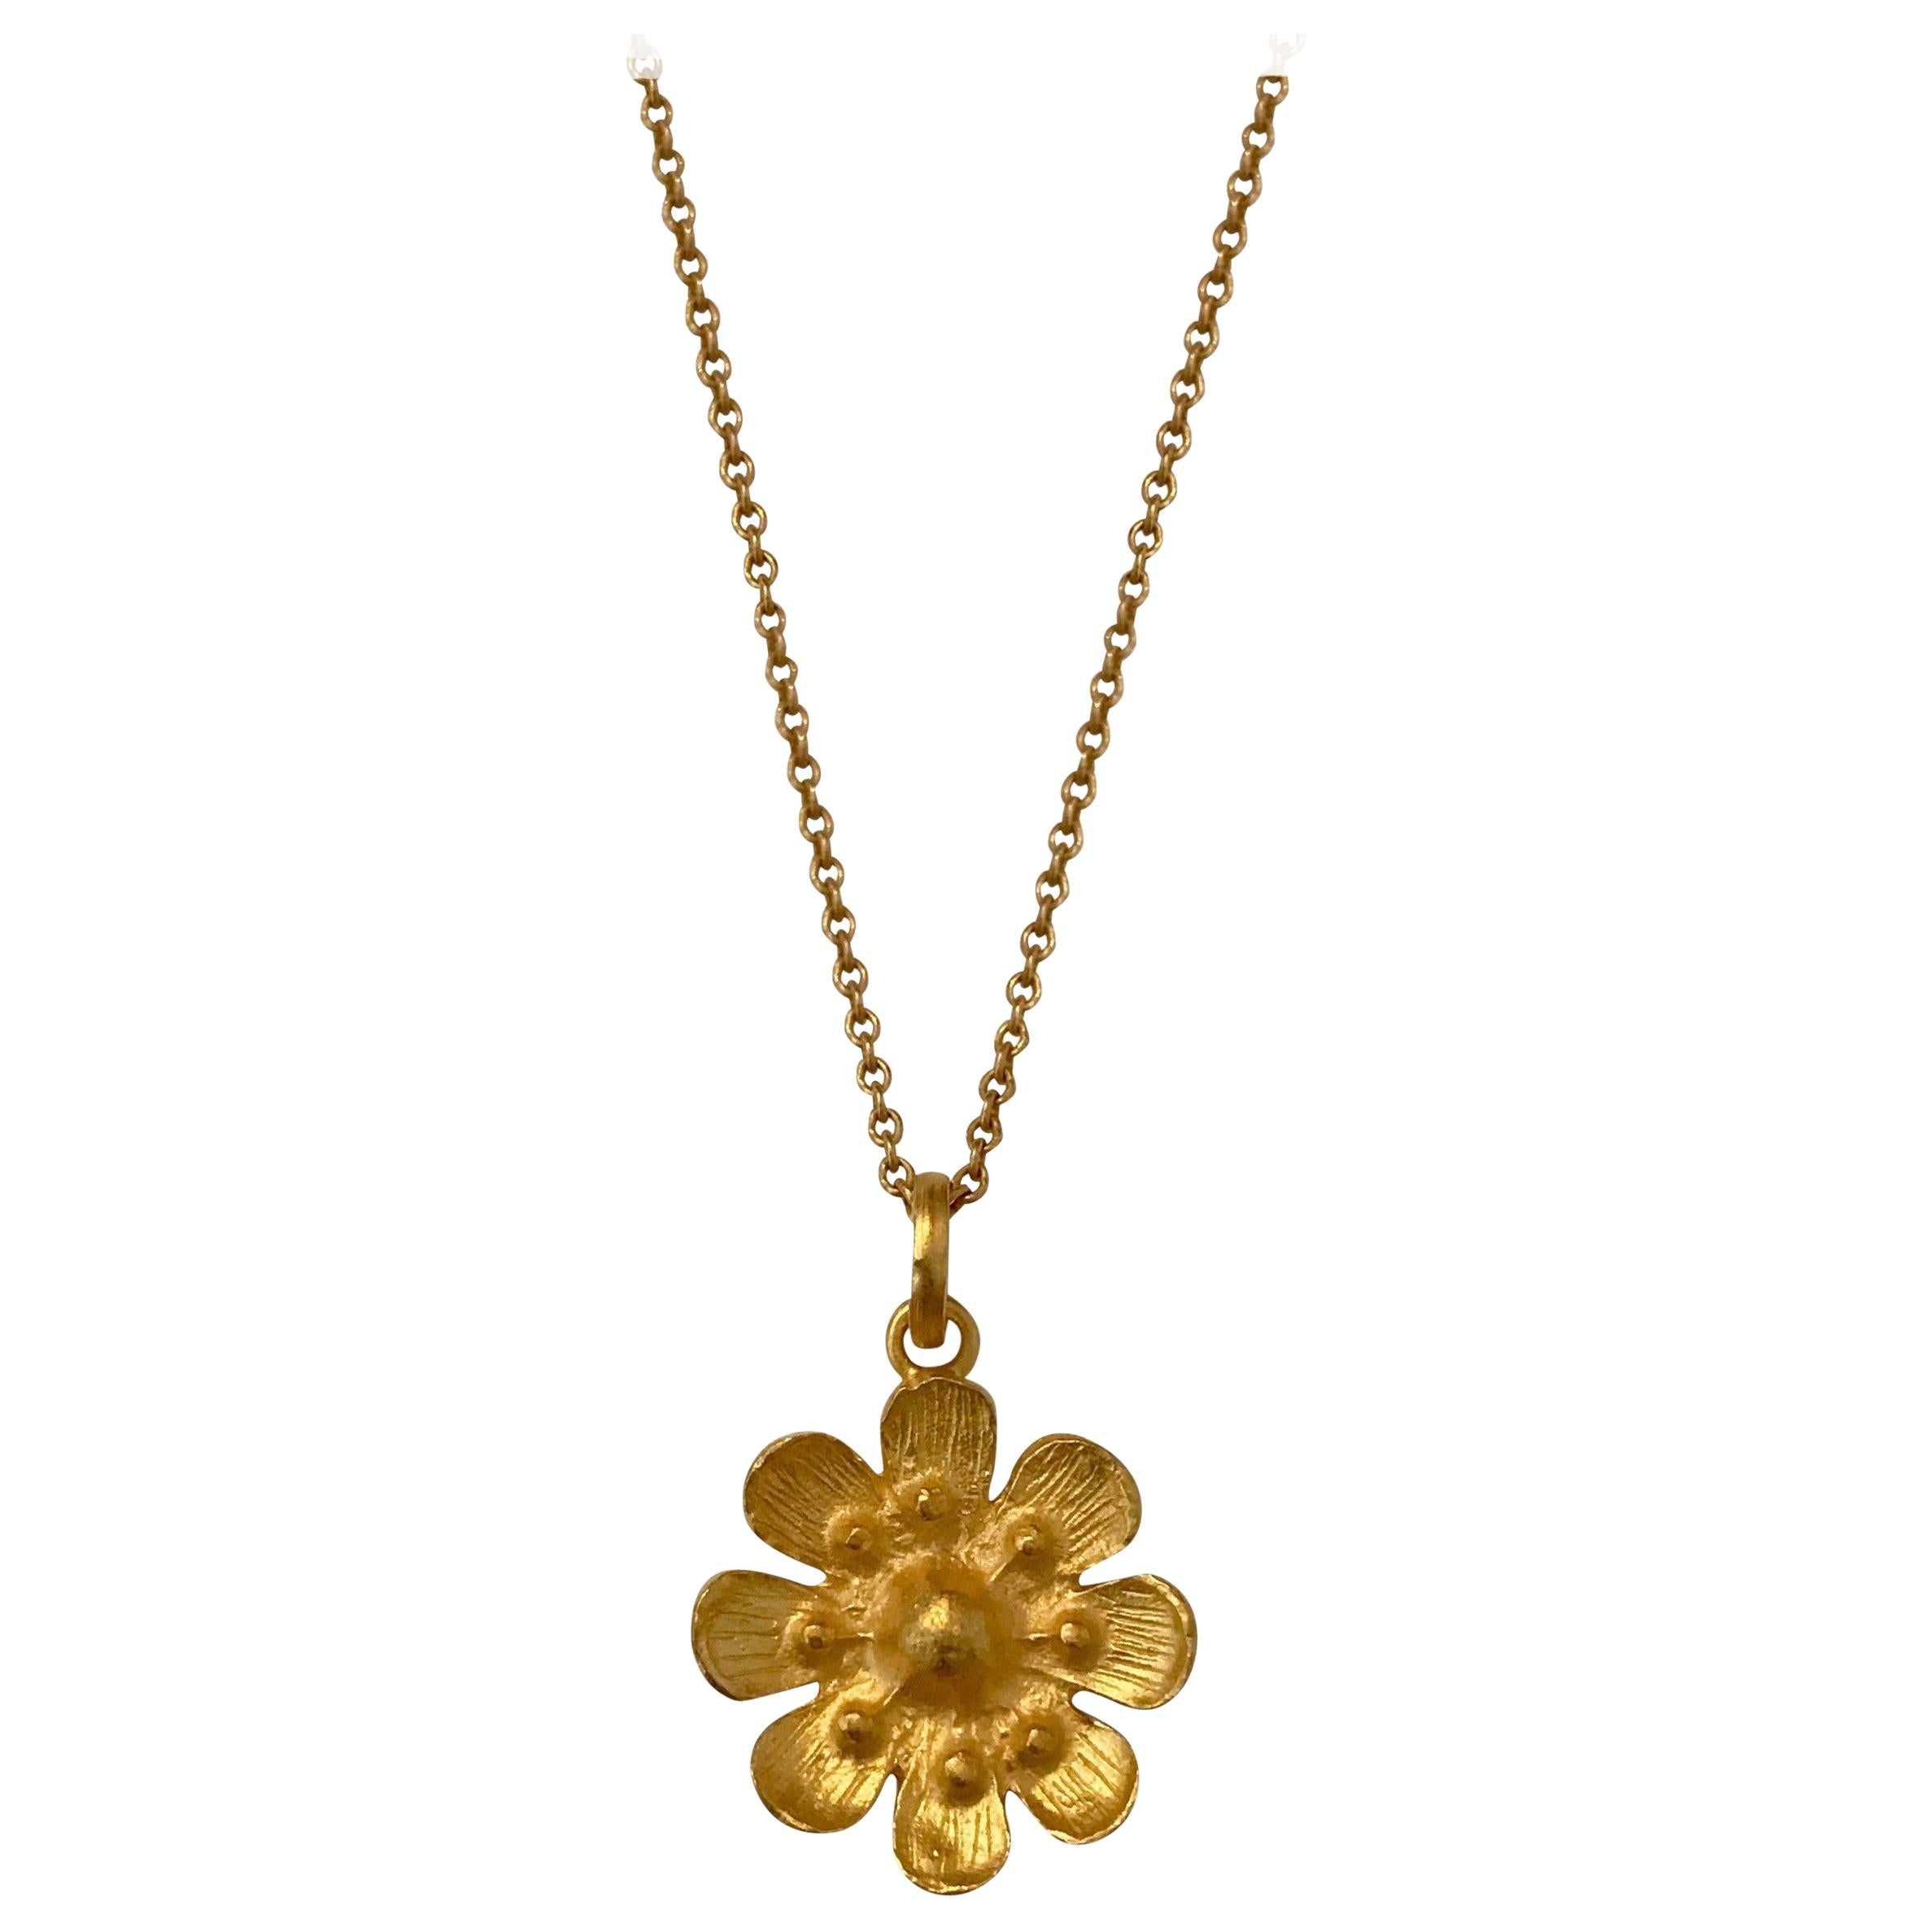 18 Karat Solid Yellow Gold Satin Finish Flower Pendant Chain Necklace For Sale